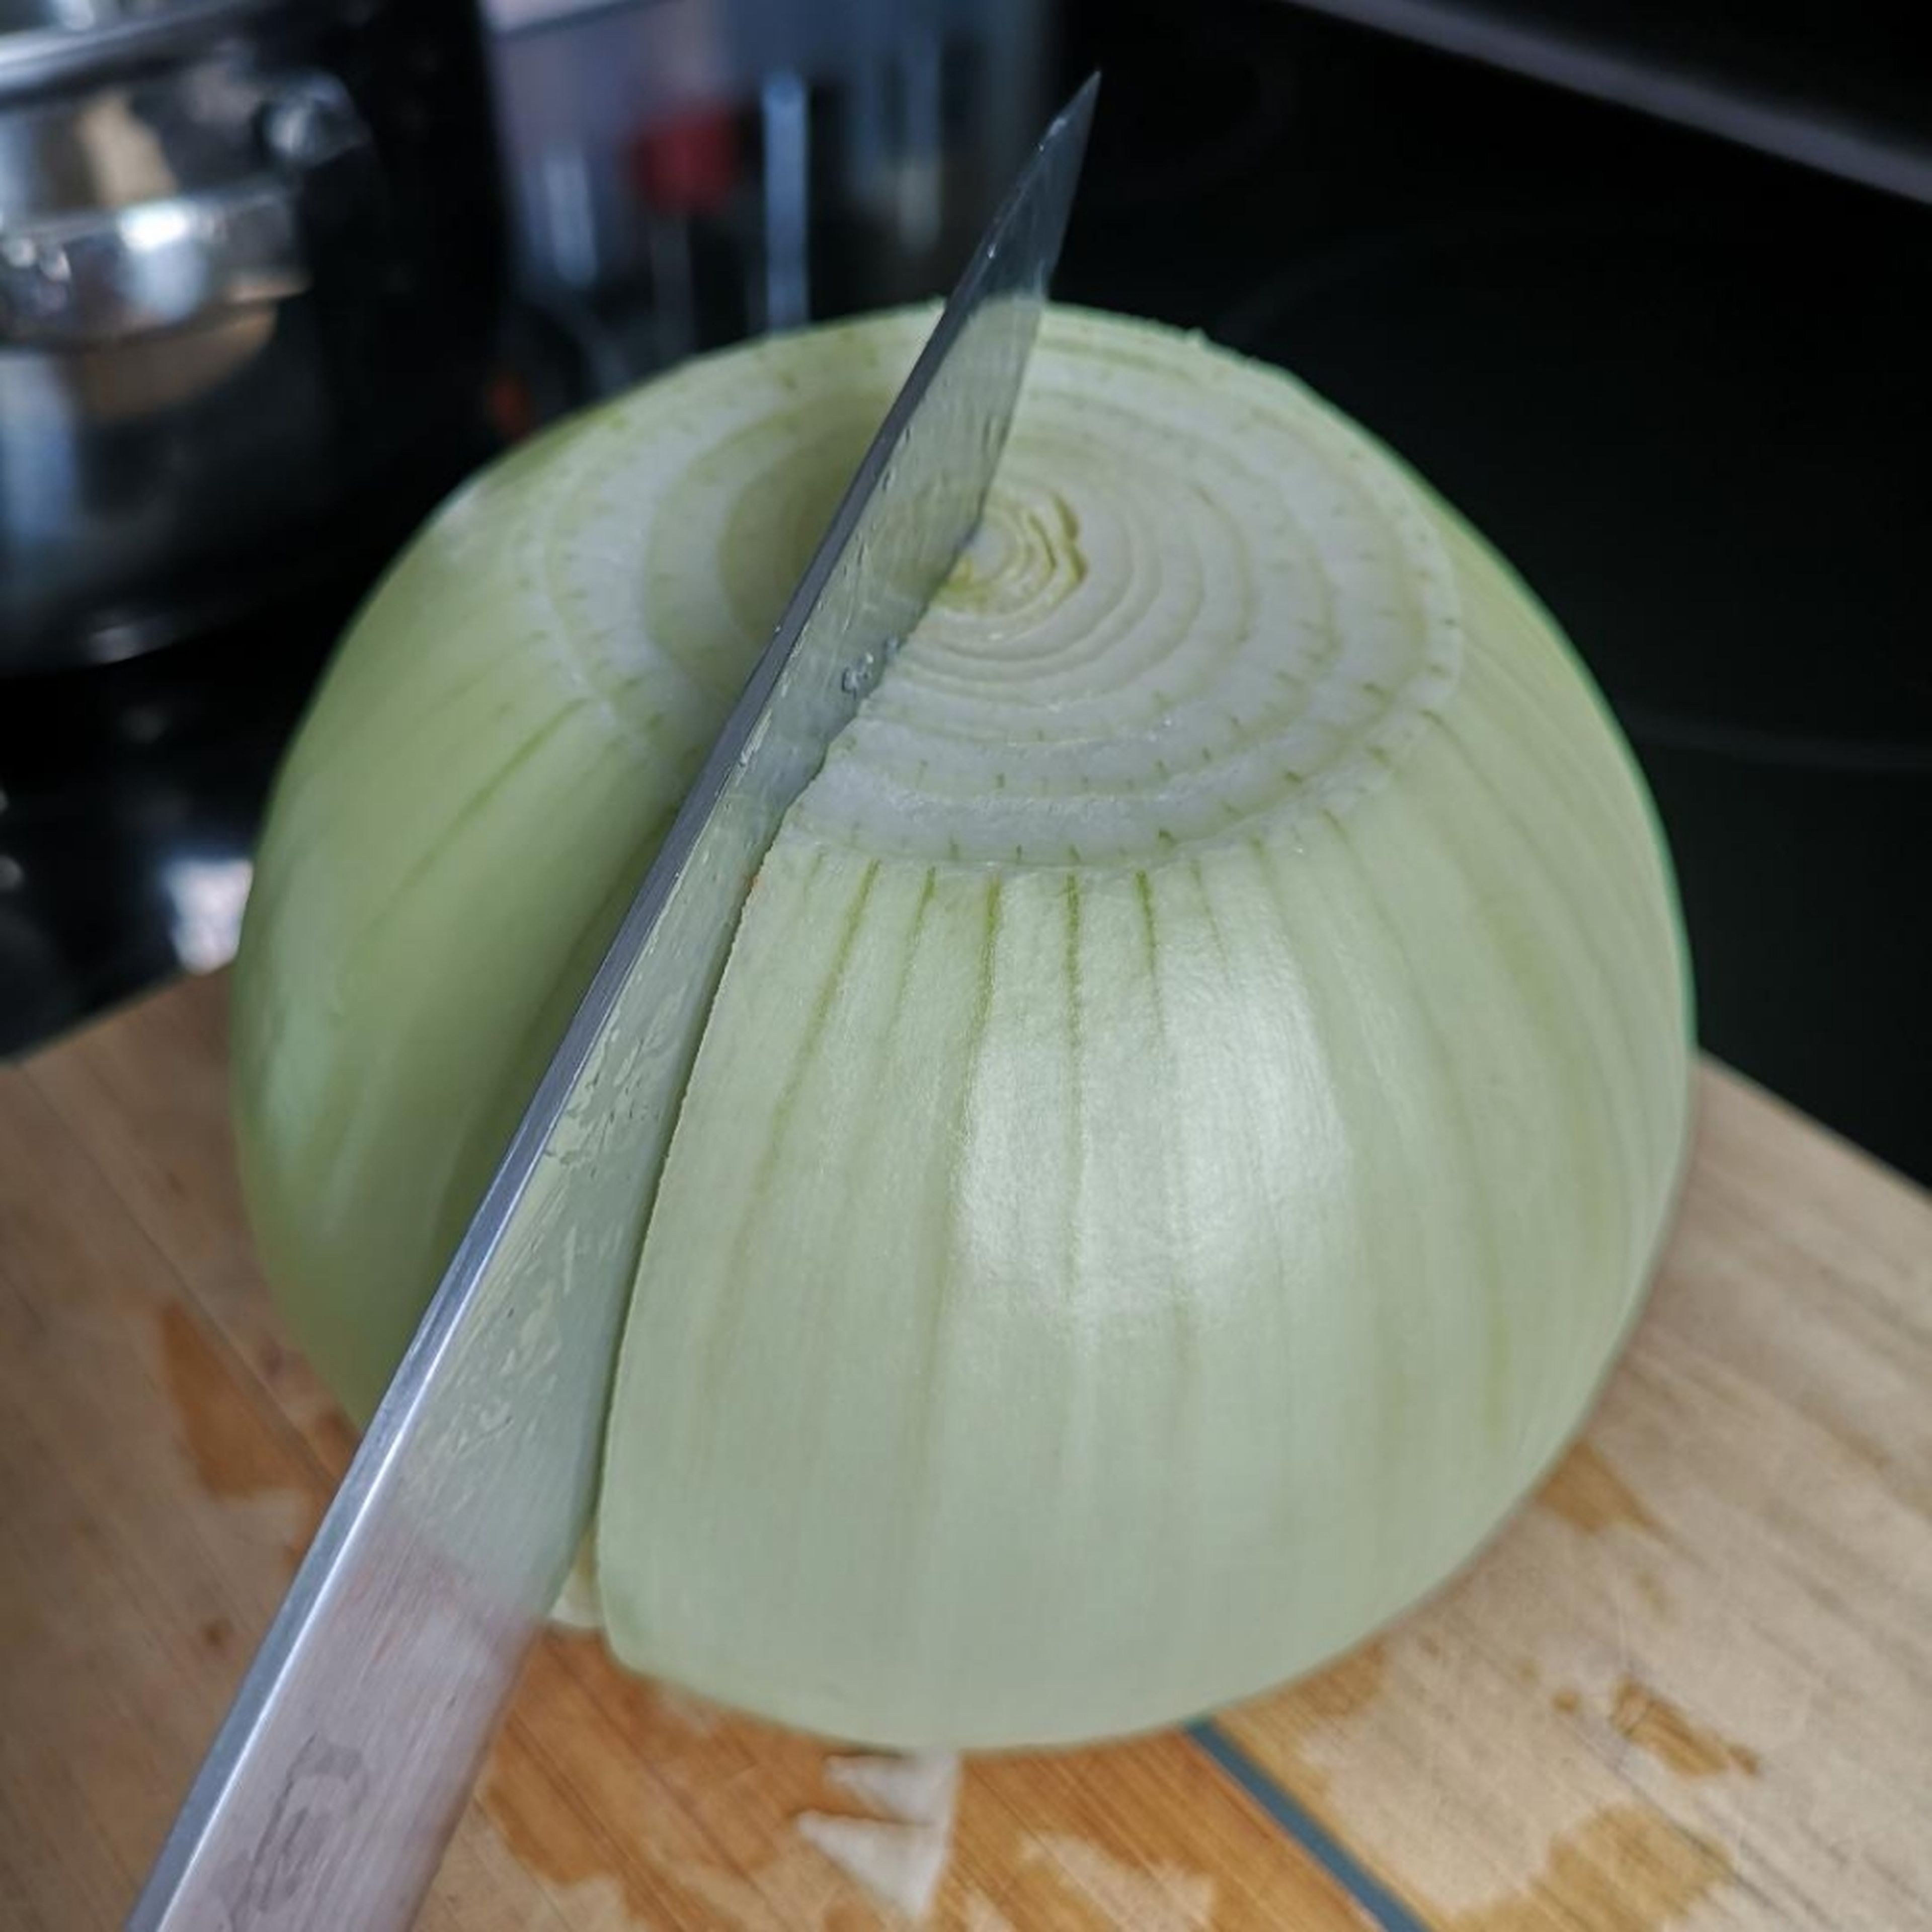 make a cut on the onion only cutting half way through just Like in the picture. make sure you peel off any hard skin.